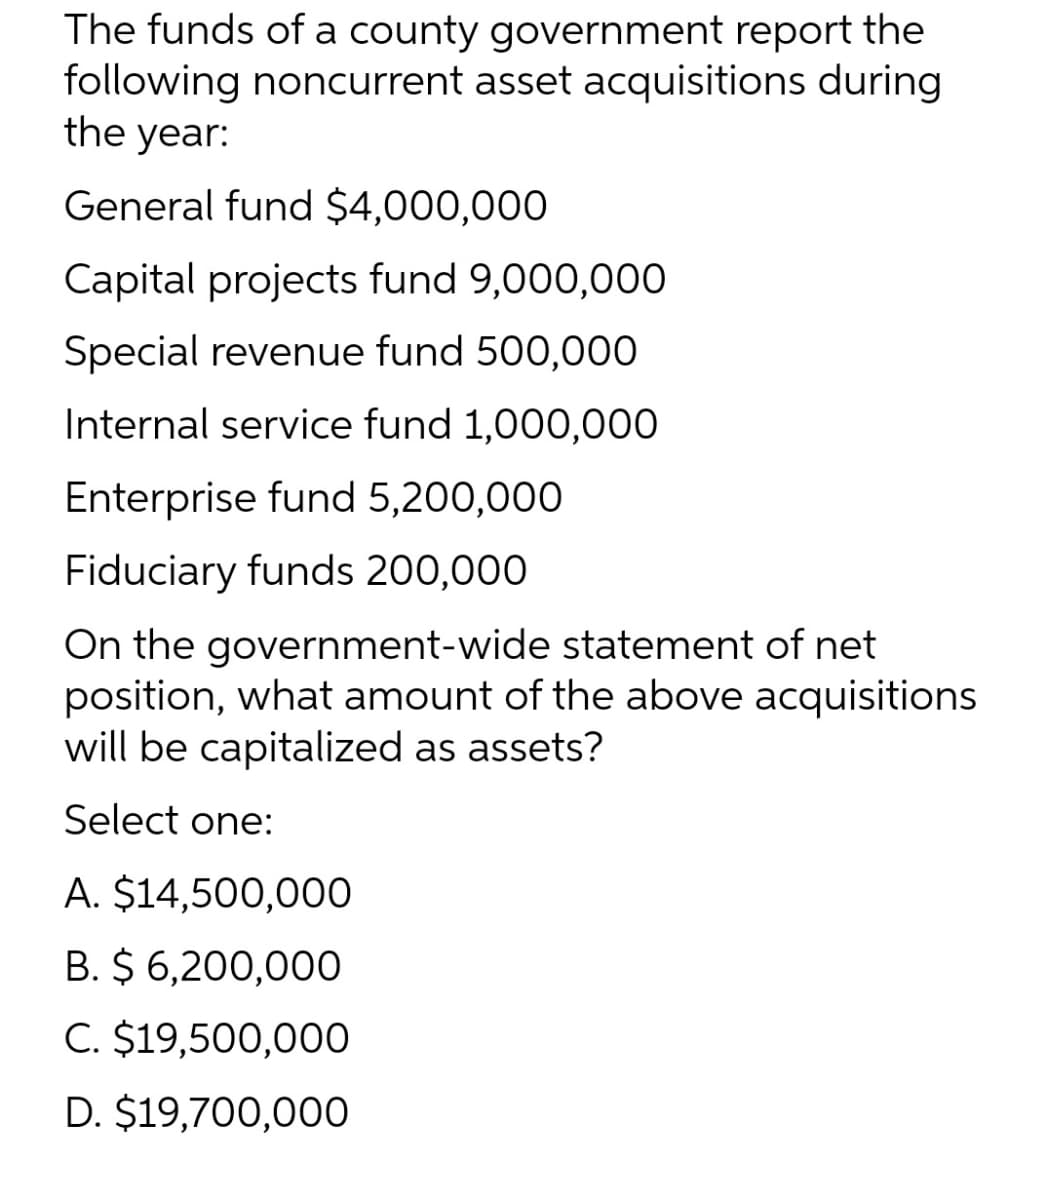 The funds of a county government report the
following noncurrent asset acquisitions during
the year:
General fund $4,000,000
Capital projects fund 9,000,000
Special revenue fund 500,000
Internal service fund 1,000,000
Enterprise fund 5,200,000
Fiduciary funds 200,000
On the government-wide statement of net
position, what amount of the above acquisitions
will be capitalized as assets?
Select one:
A. $14,500,00O
B. $ 6,200,000
C. $19,500,000
D. $19,700,000
